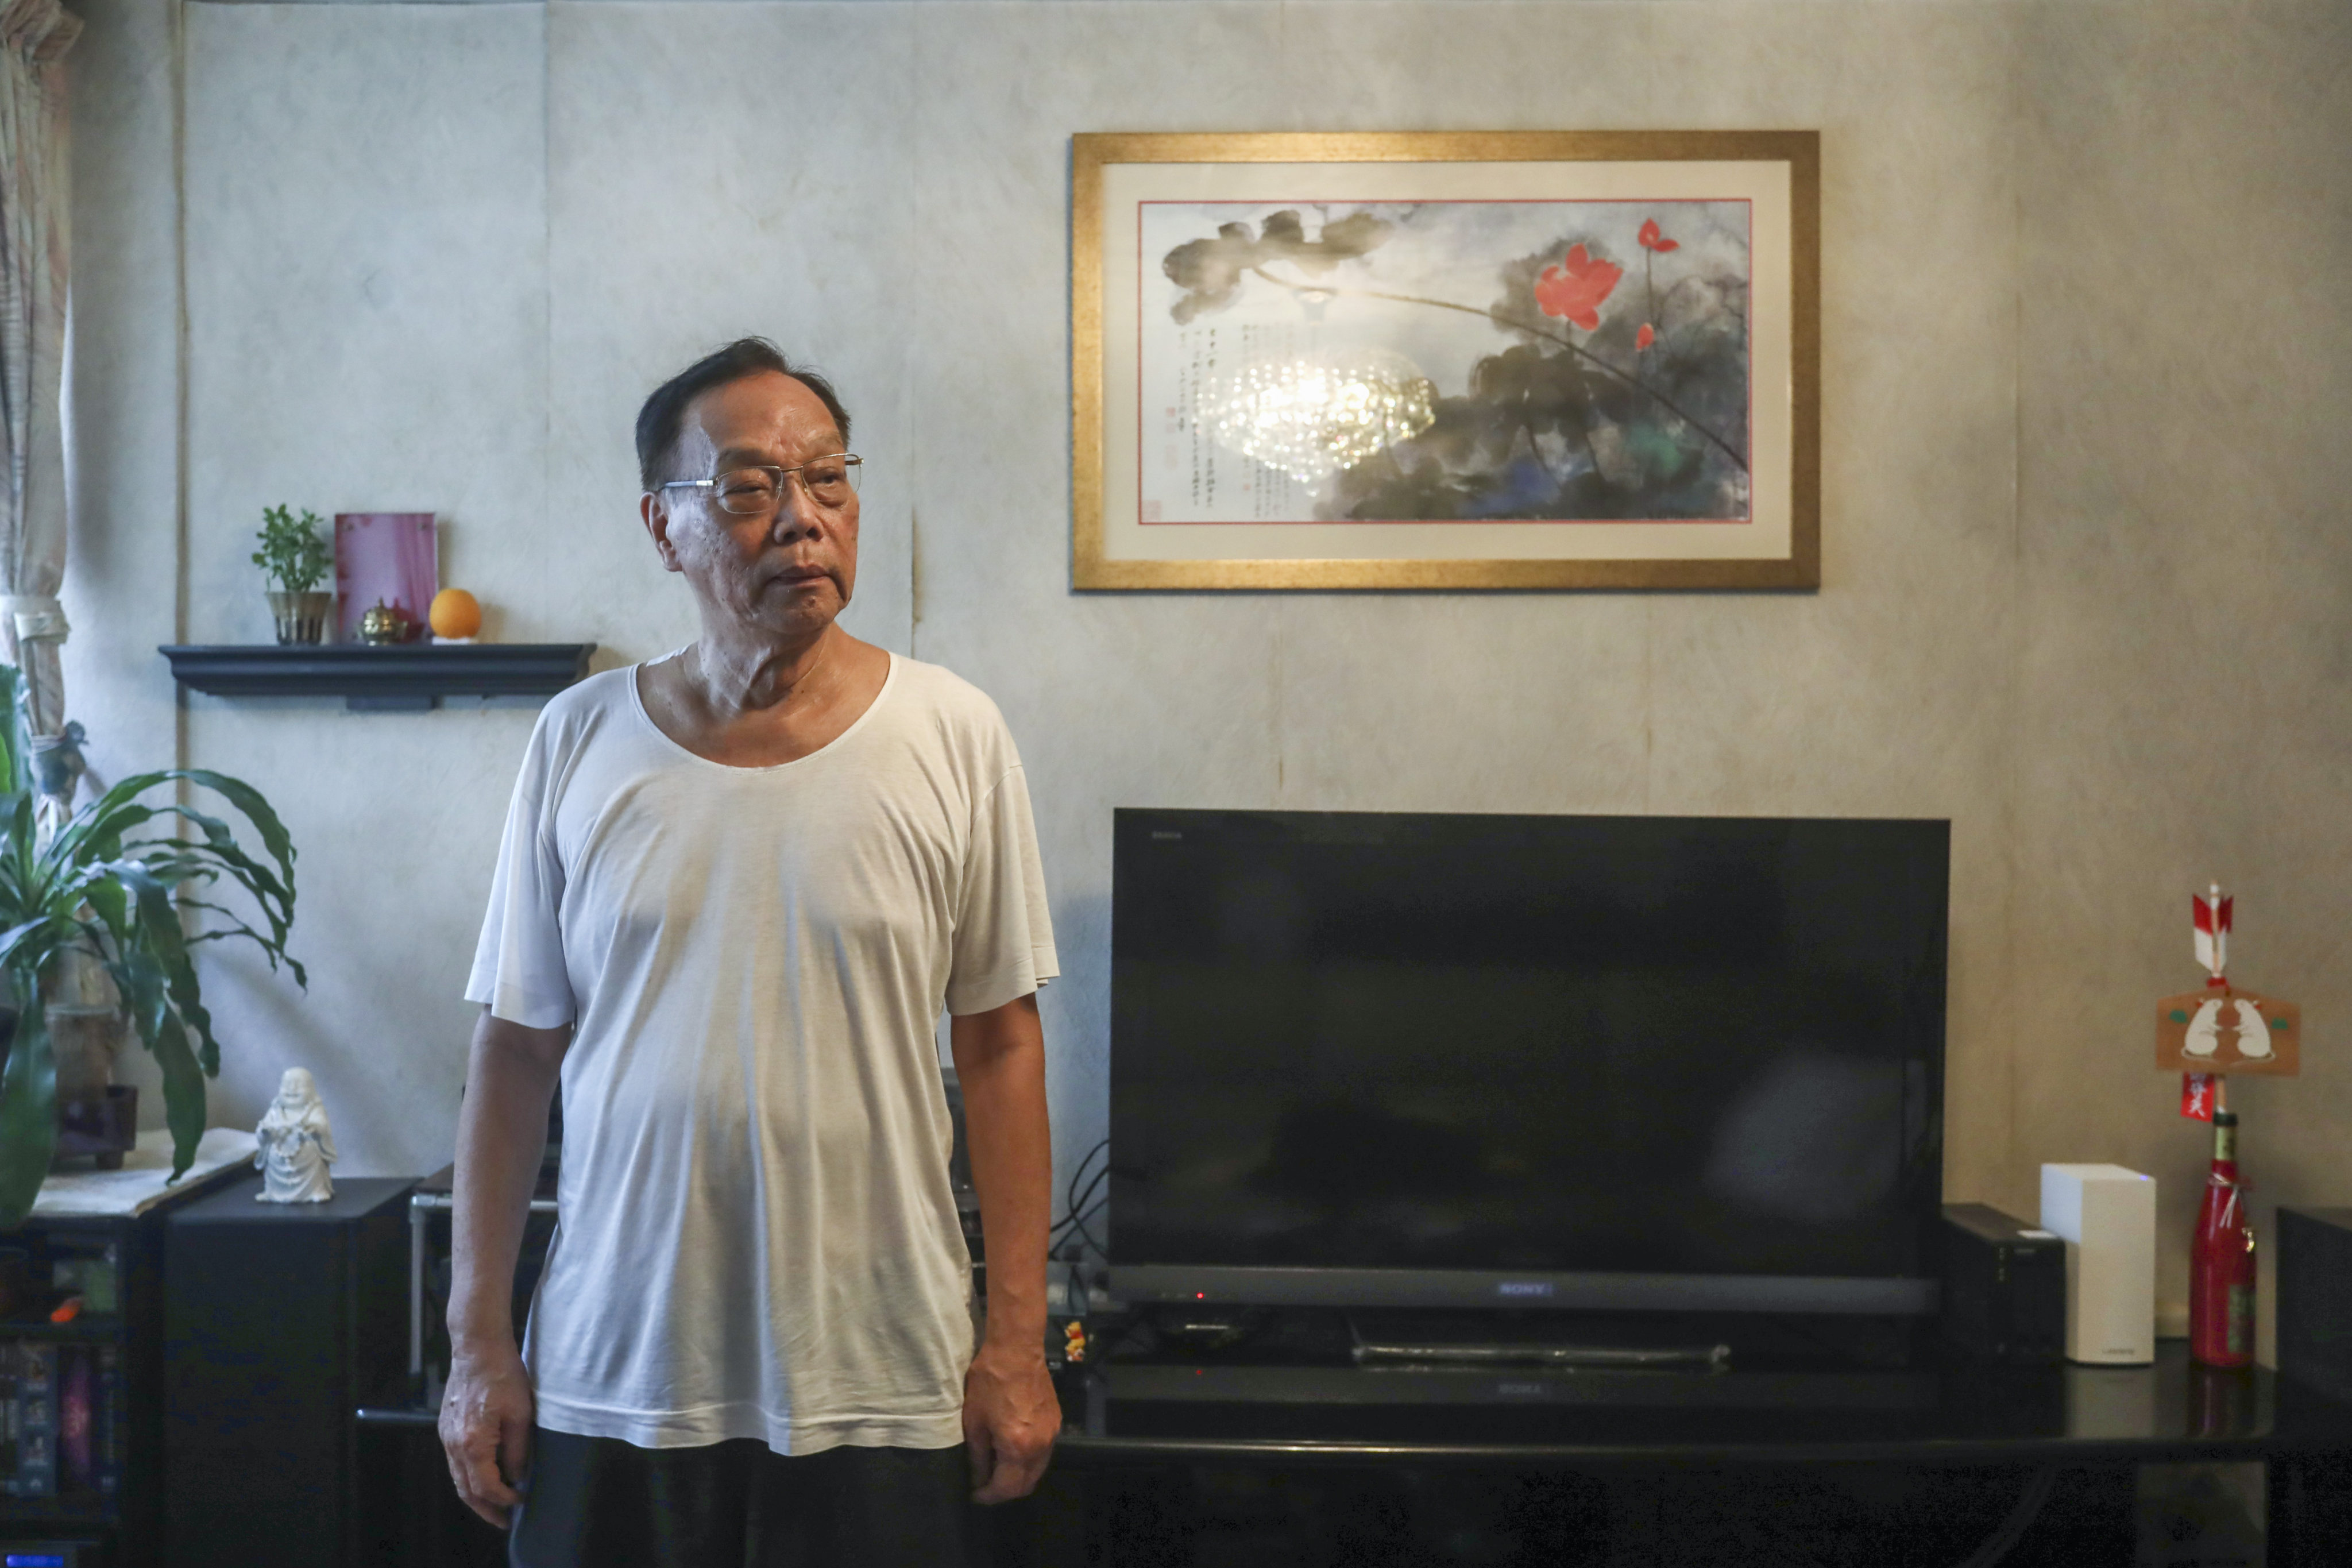 Tsang Yuk-kwan, 82, pictured on July 7, 2022, in his 940 sq ft flat in Cheung Sha Wan, which he bought in 1970 under the Civil Servants’ Co-operative Building Society Scheme. Photo: SCMP / Jonathan Wong